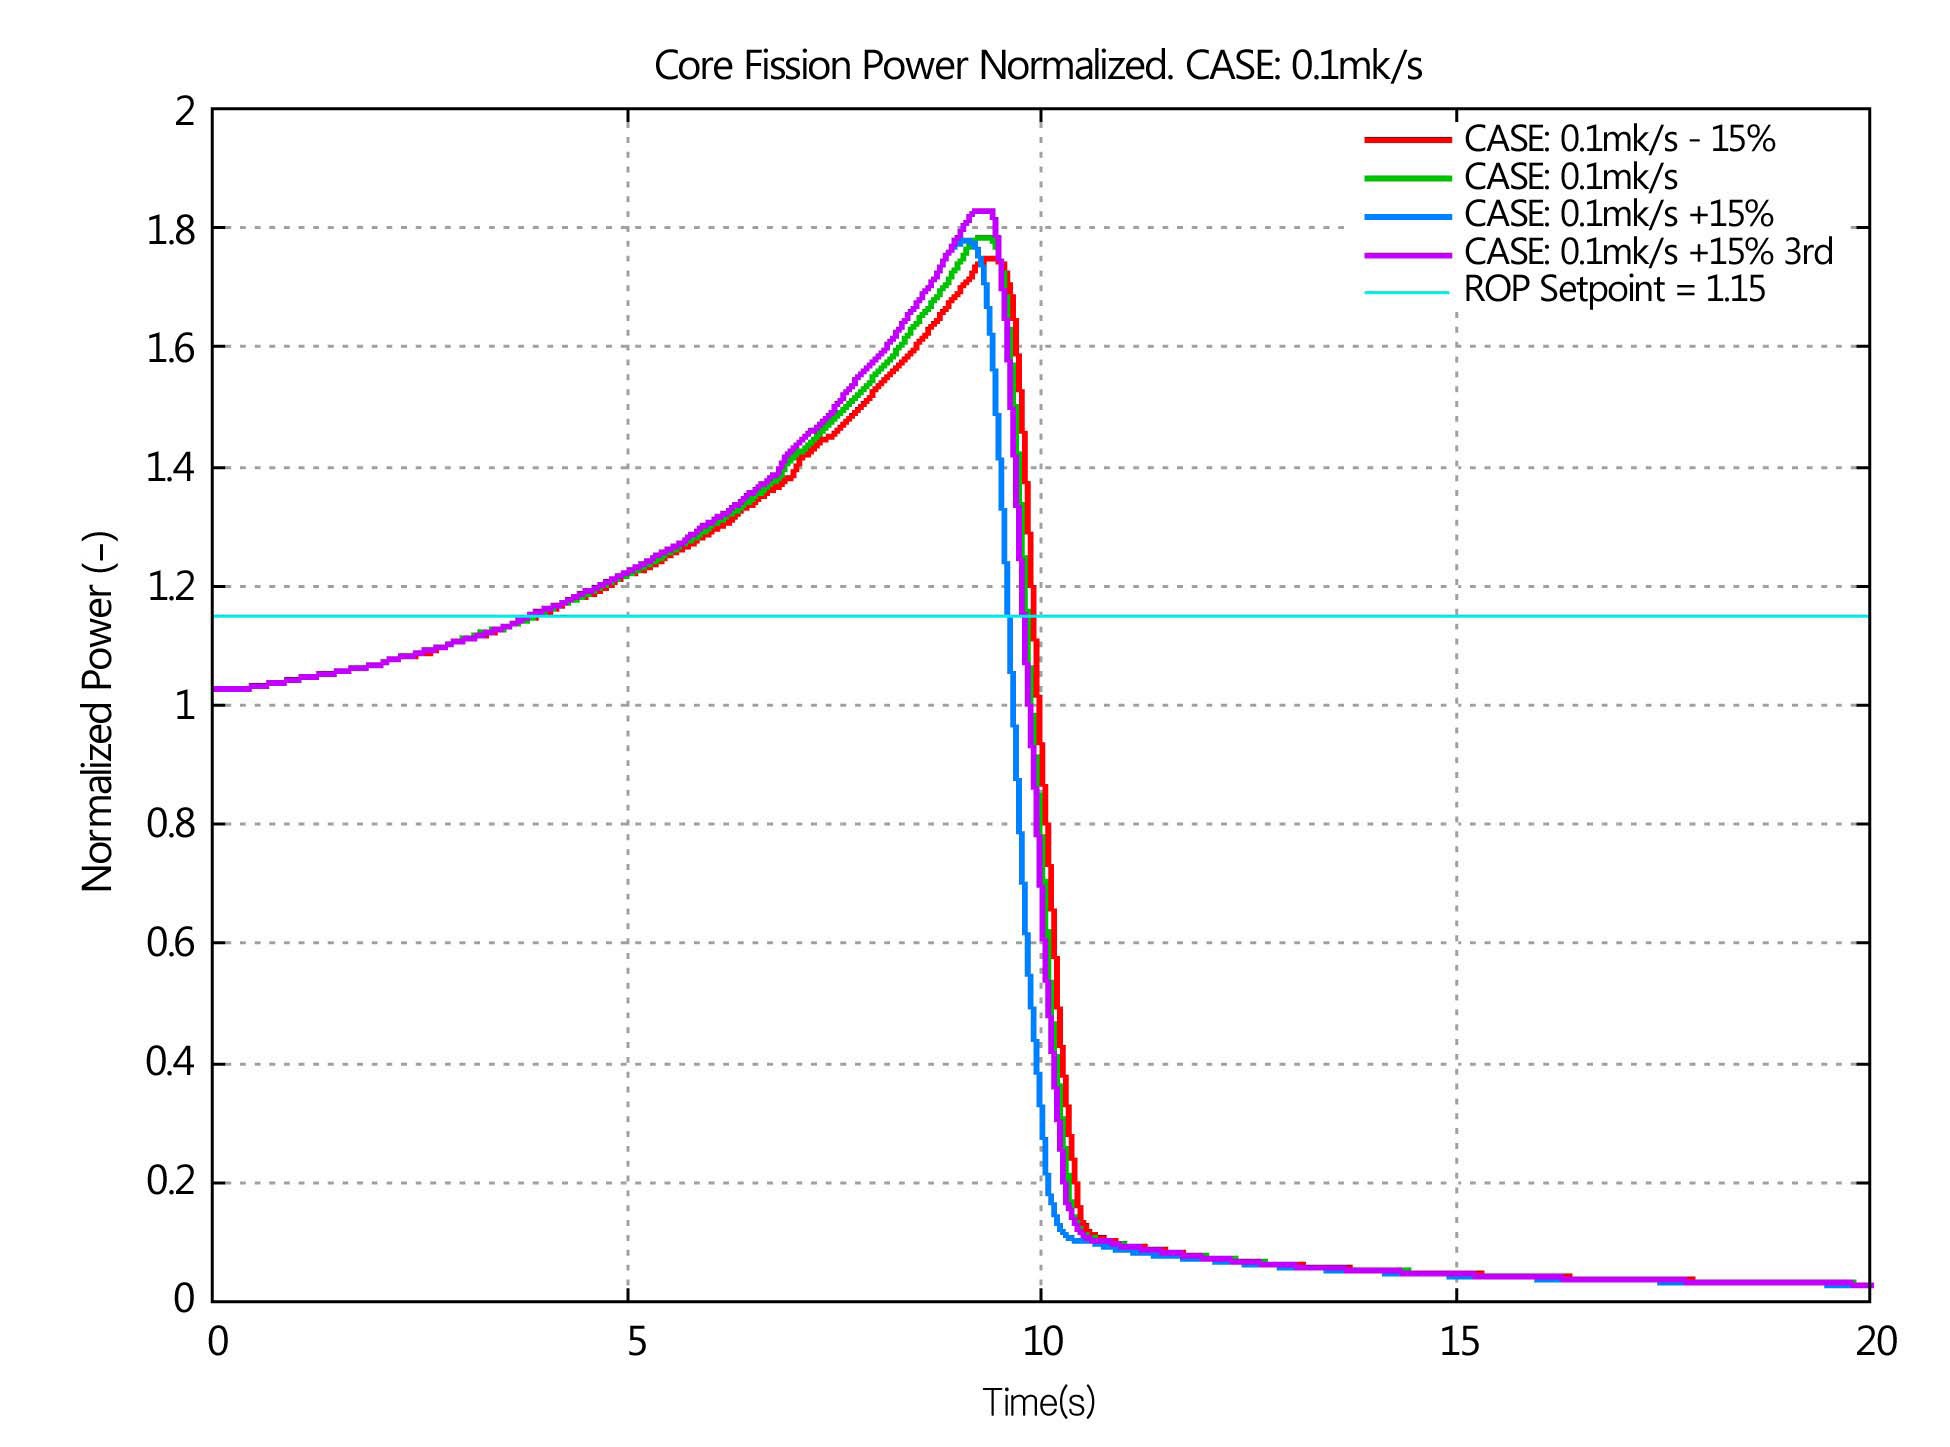 Normalized Core Fission Power (Initial Power 103%FP with an Insertion Rate of 0.1mk/s)